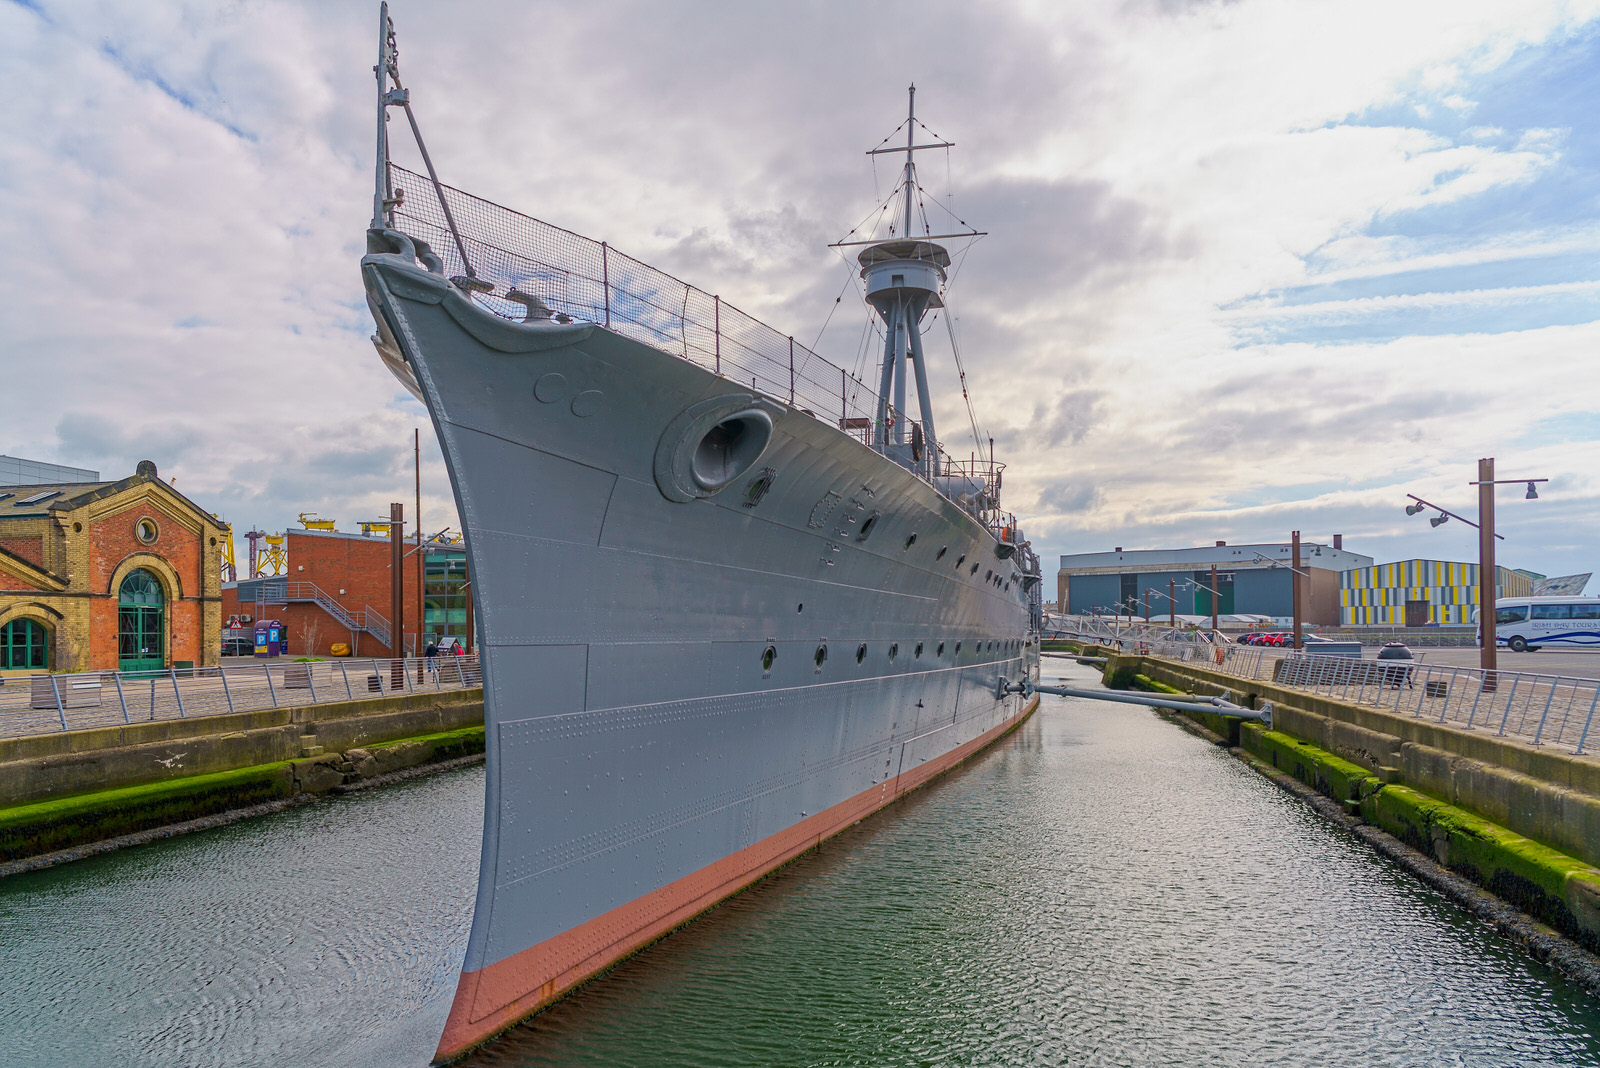 HMS CAROLINE IS AN ATTRACTIVE SHIP [NOW A MUSEUM SHIP AT ALEXANDRA DOCK IN BELFAST]
 003